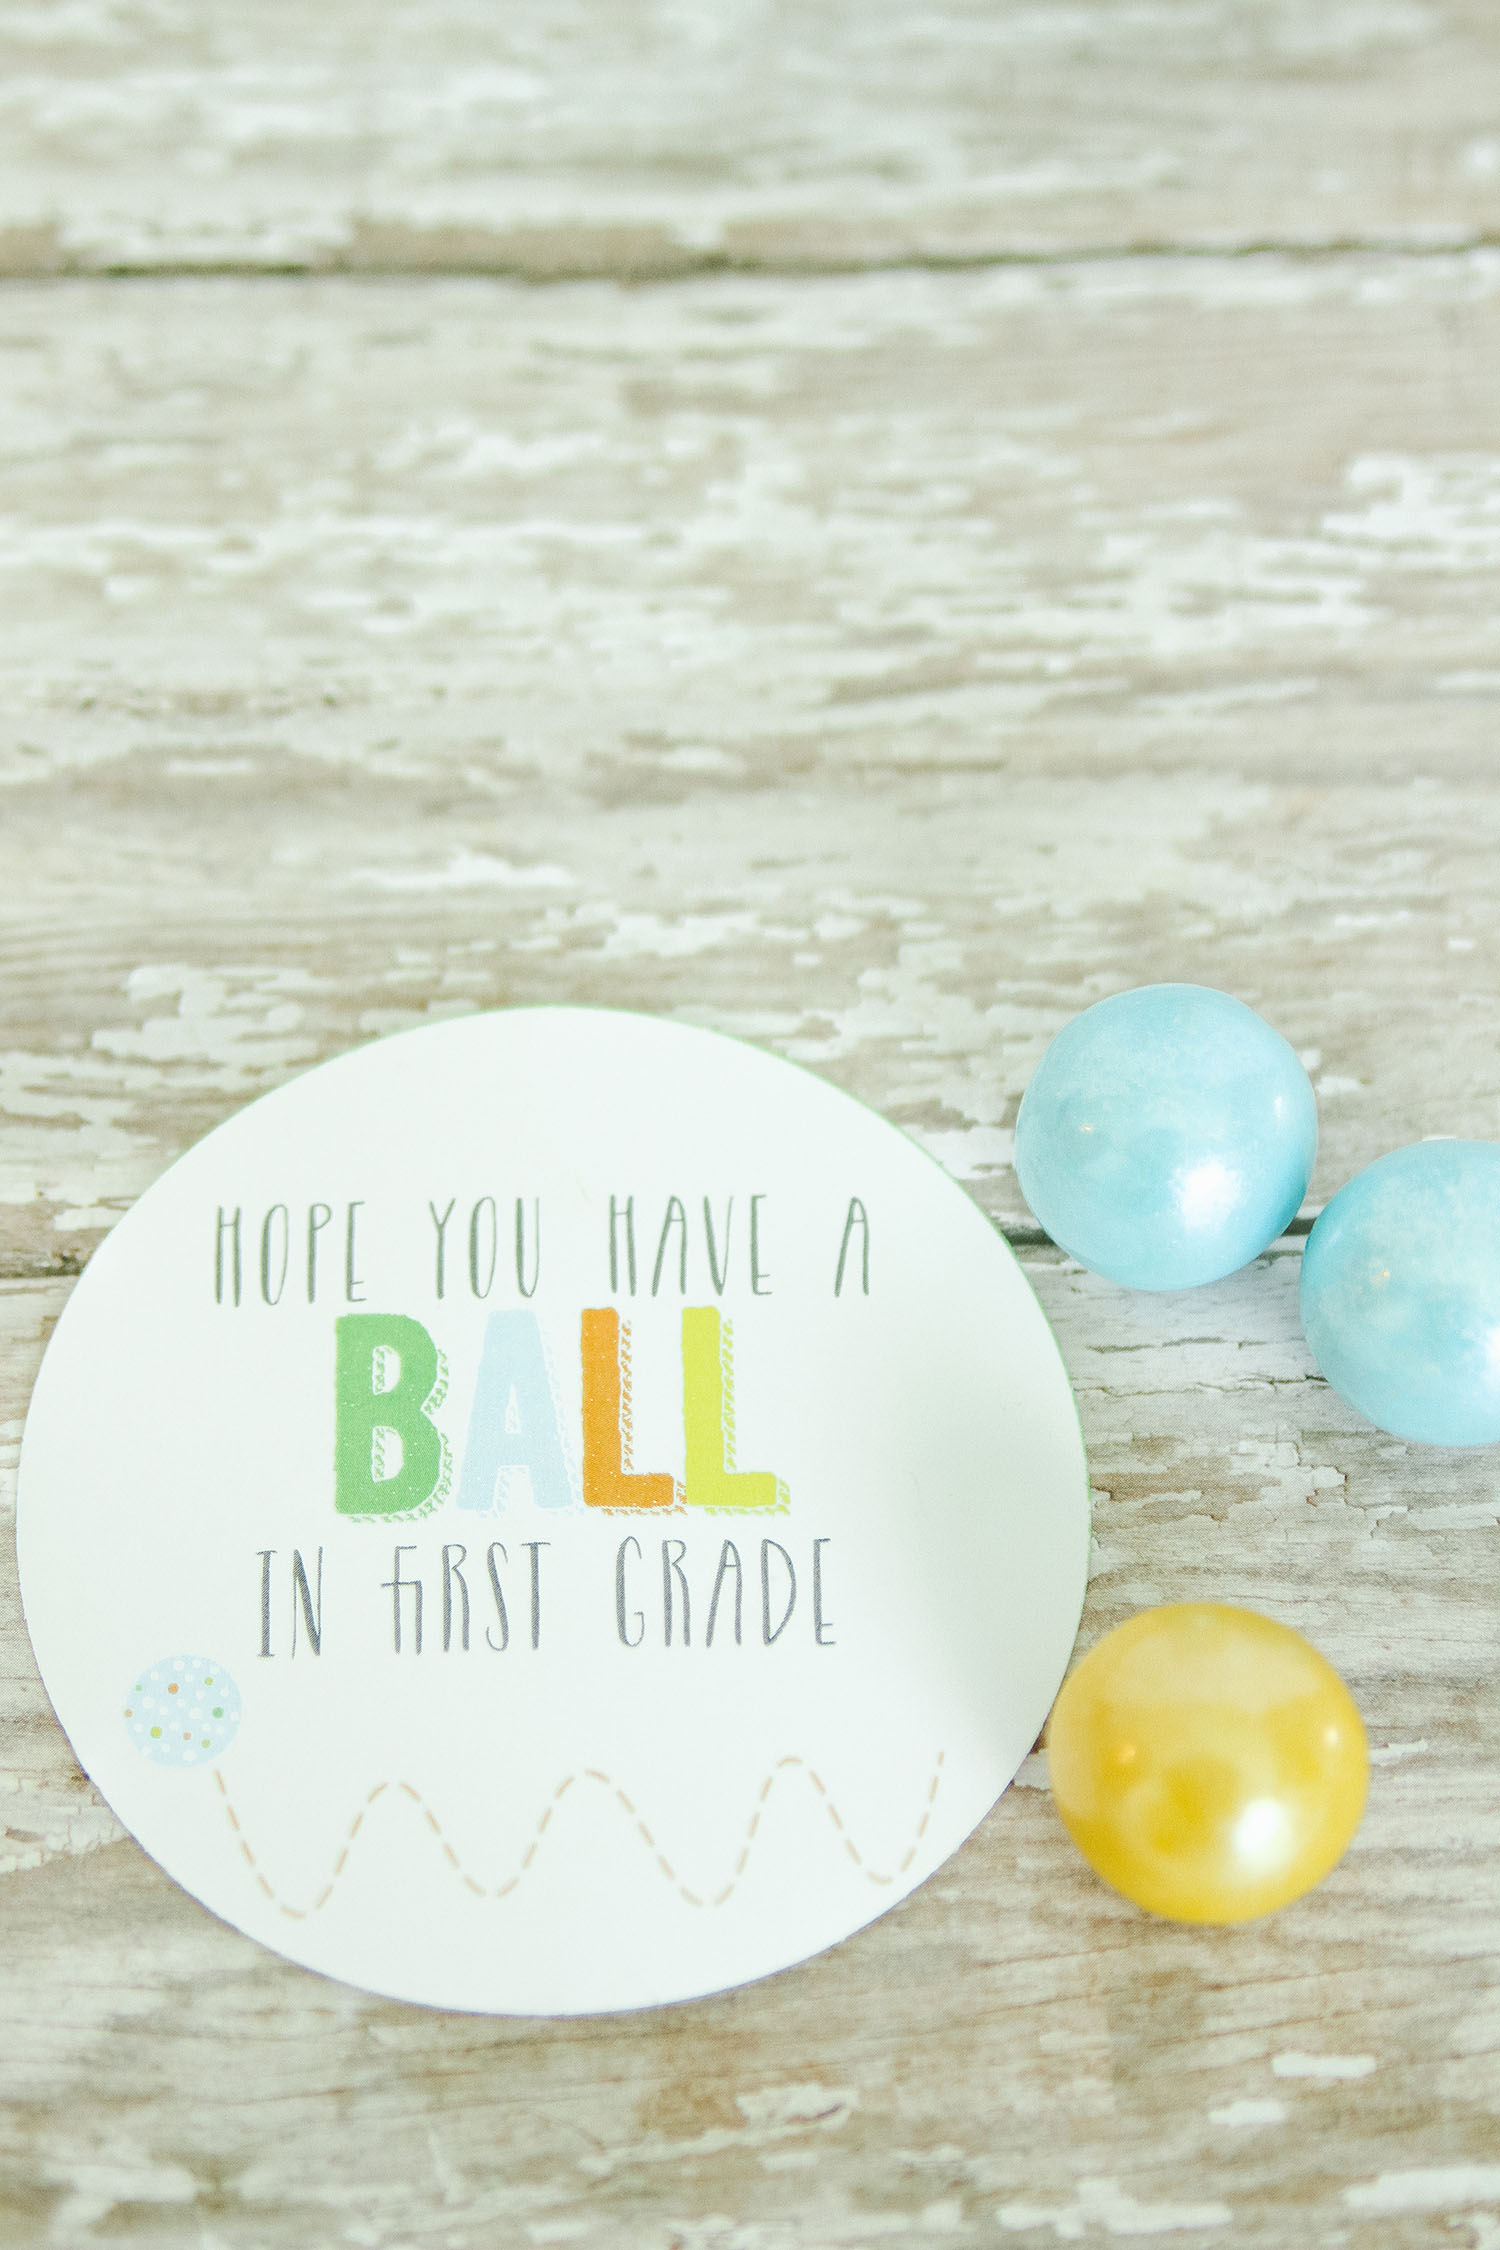 FREE back to school printables featured by US life and style blogger, By Jen Rose